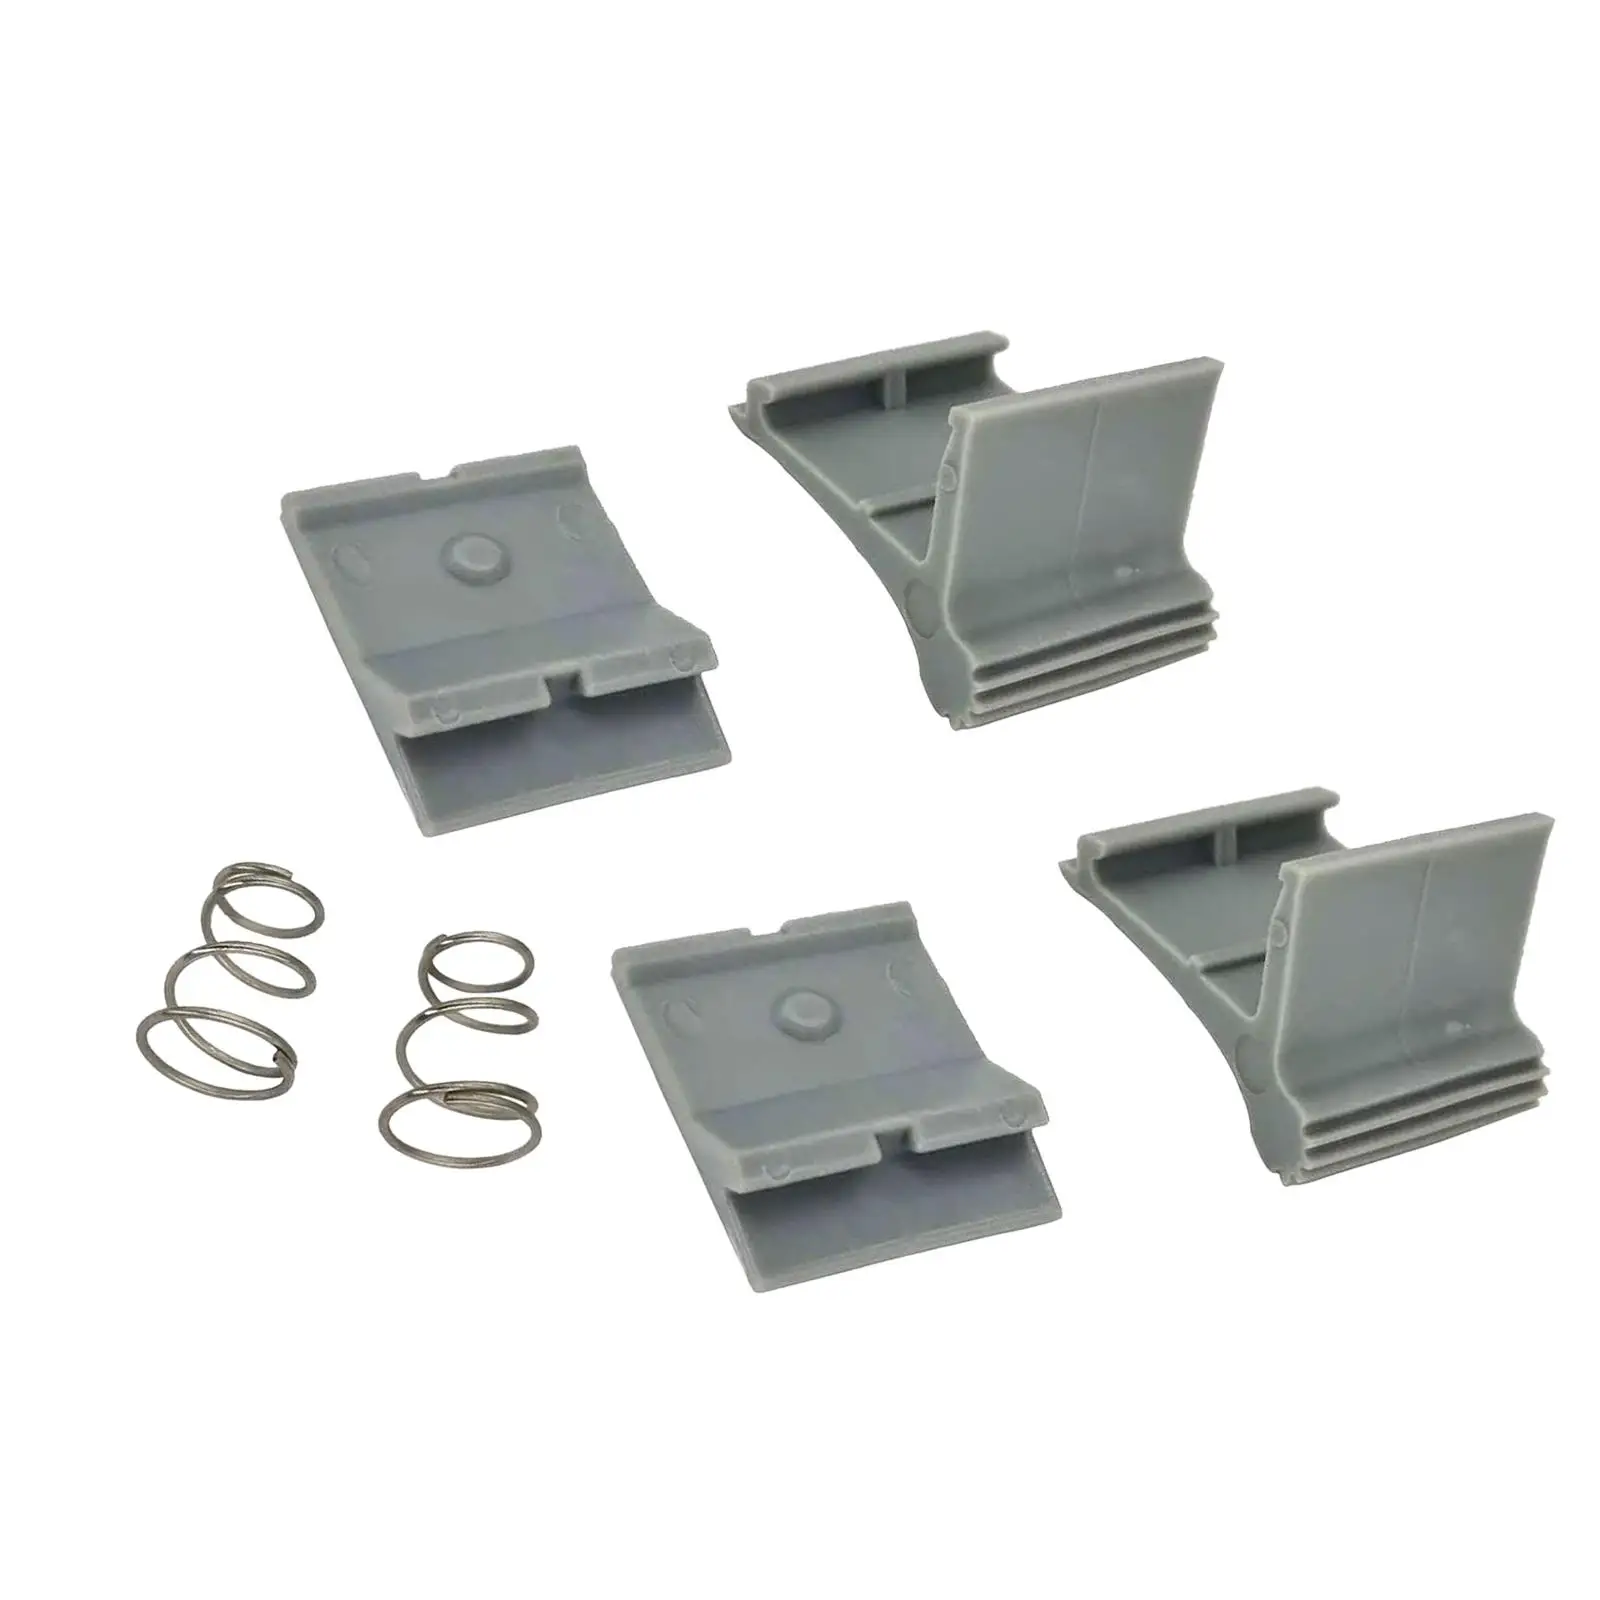 RV Awning Arm Slider Catch Set Assembly with 2 Springs Accessory Replacement Easy Installation for Camper Trailer Motorhome